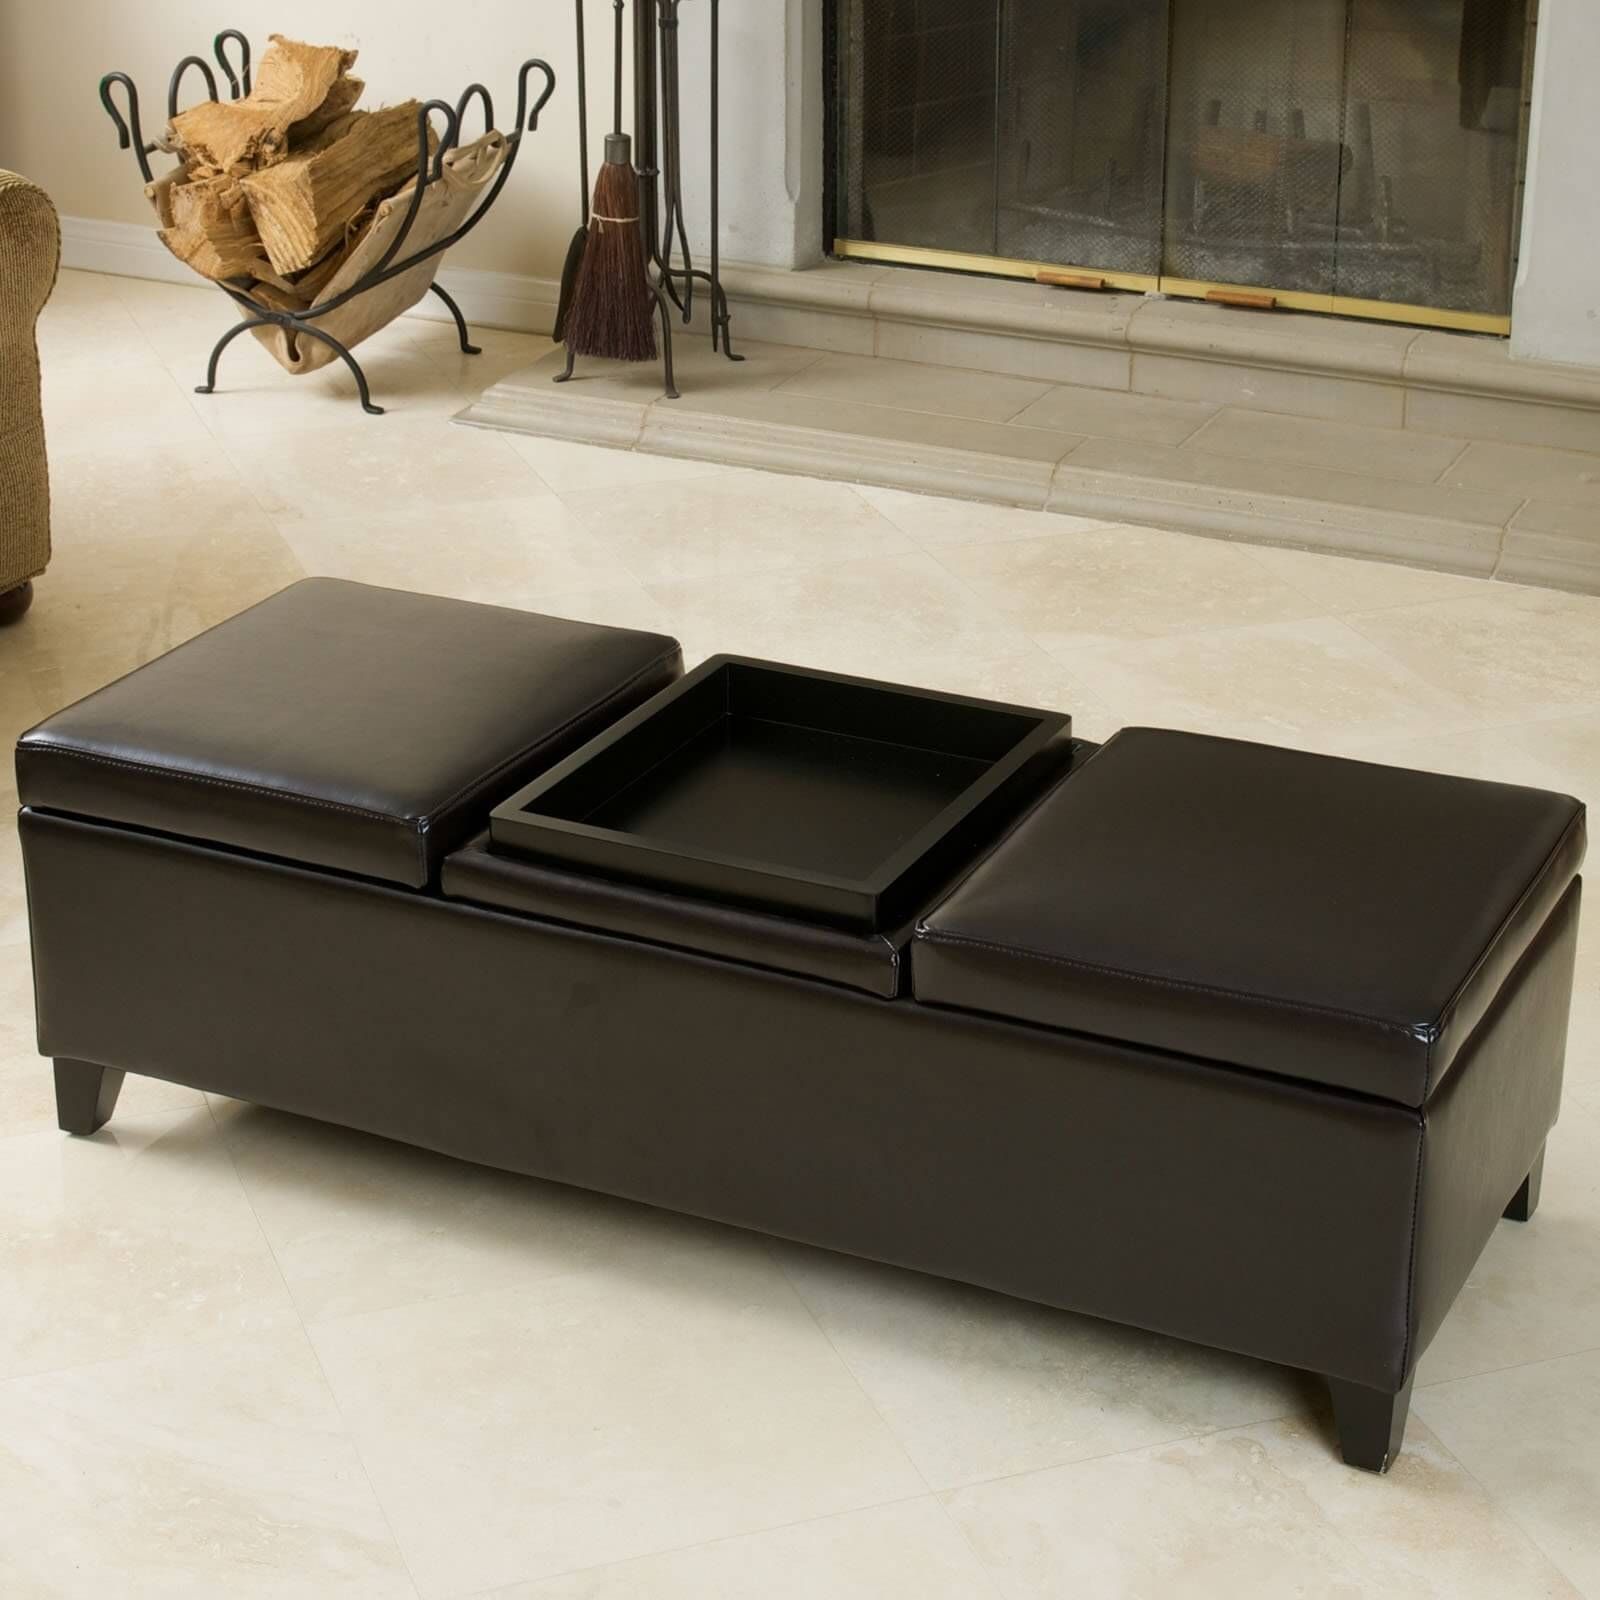 36 Top Brown Leather Ottoman Coffee Tables In Brown Leather Ottoman Coffee Tables With Storages (View 1 of 30)